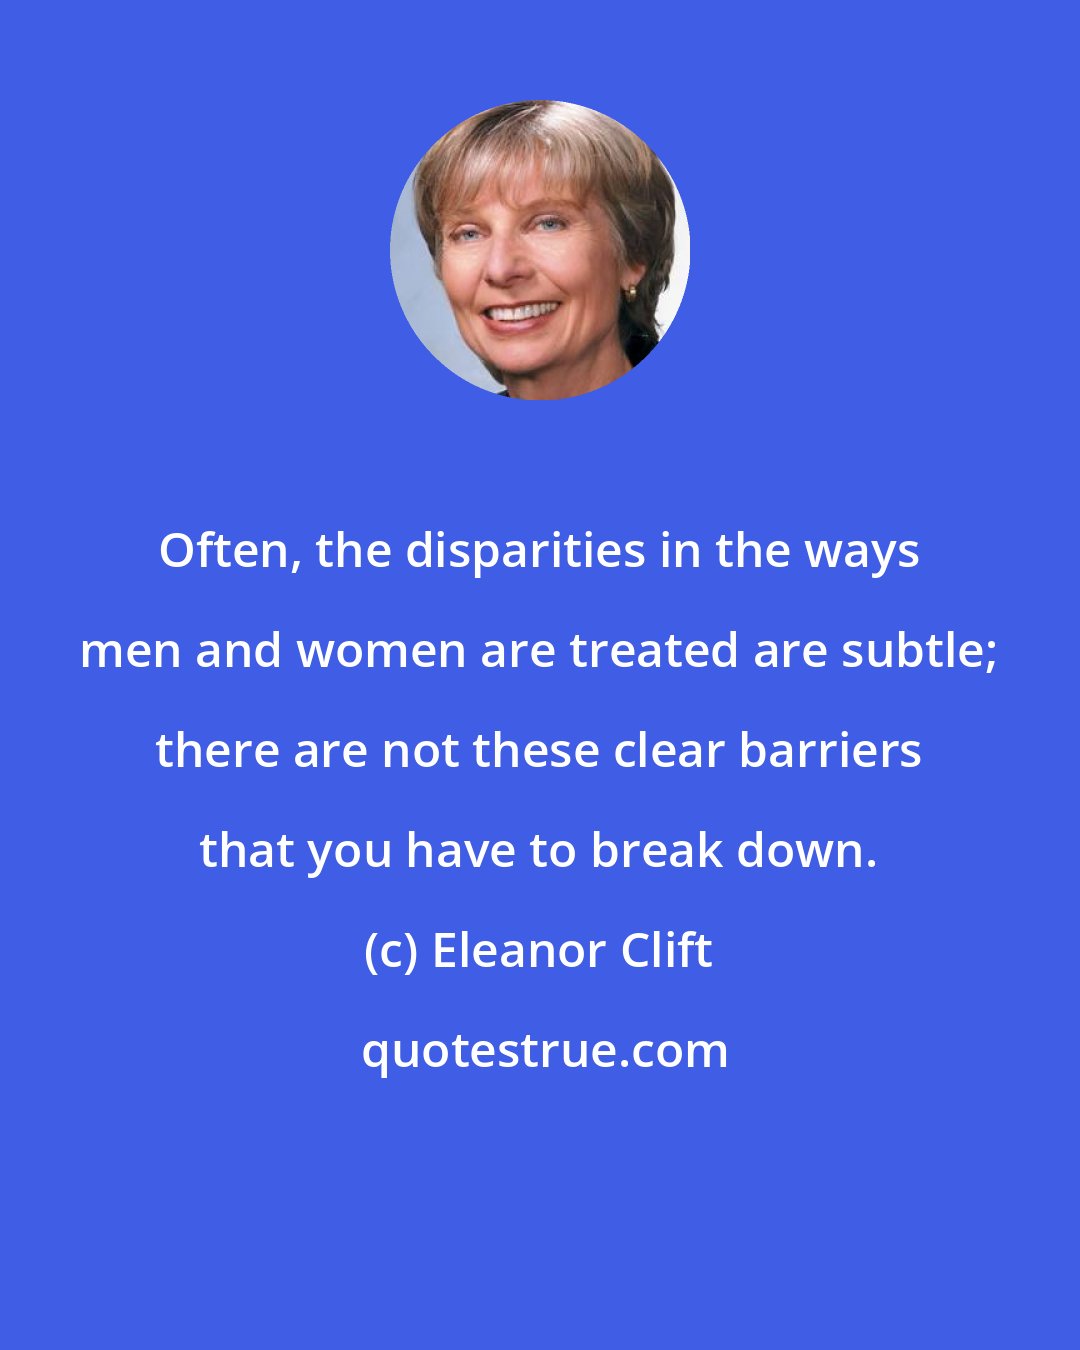 Eleanor Clift: Often, the disparities in the ways men and women are treated are subtle; there are not these clear barriers that you have to break down.